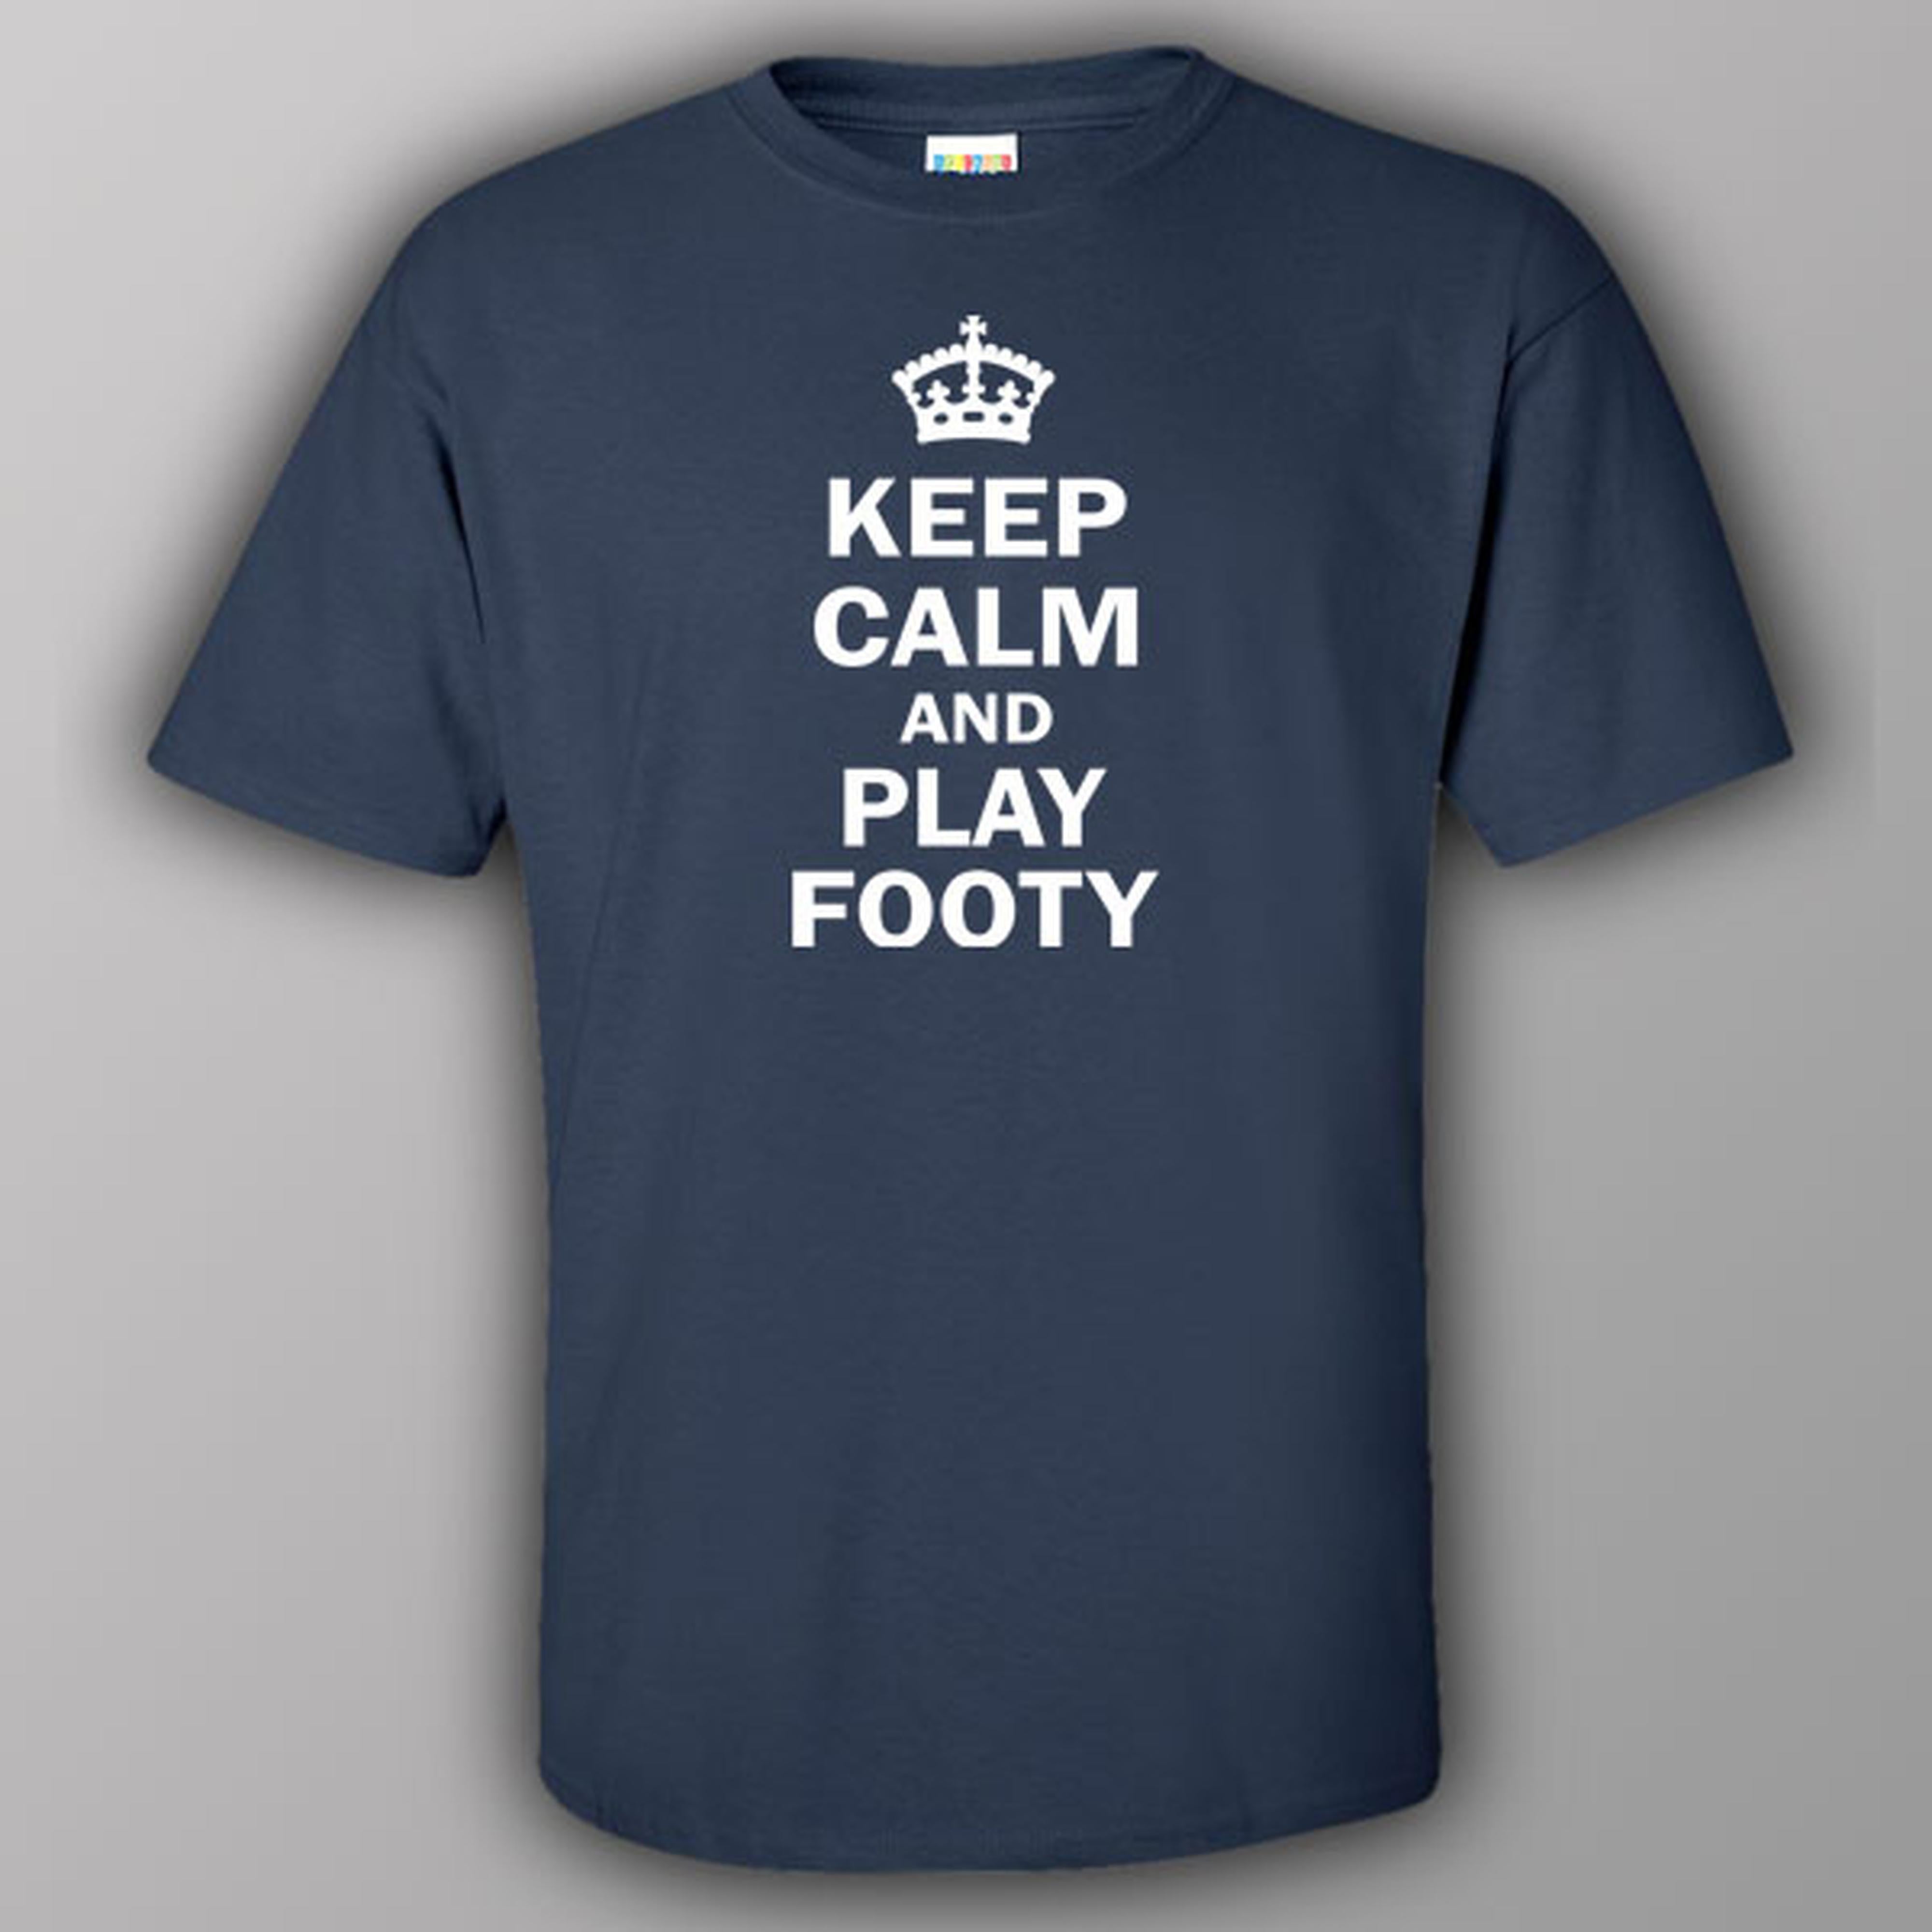 keep-calm-and-play-footy-t-shirt